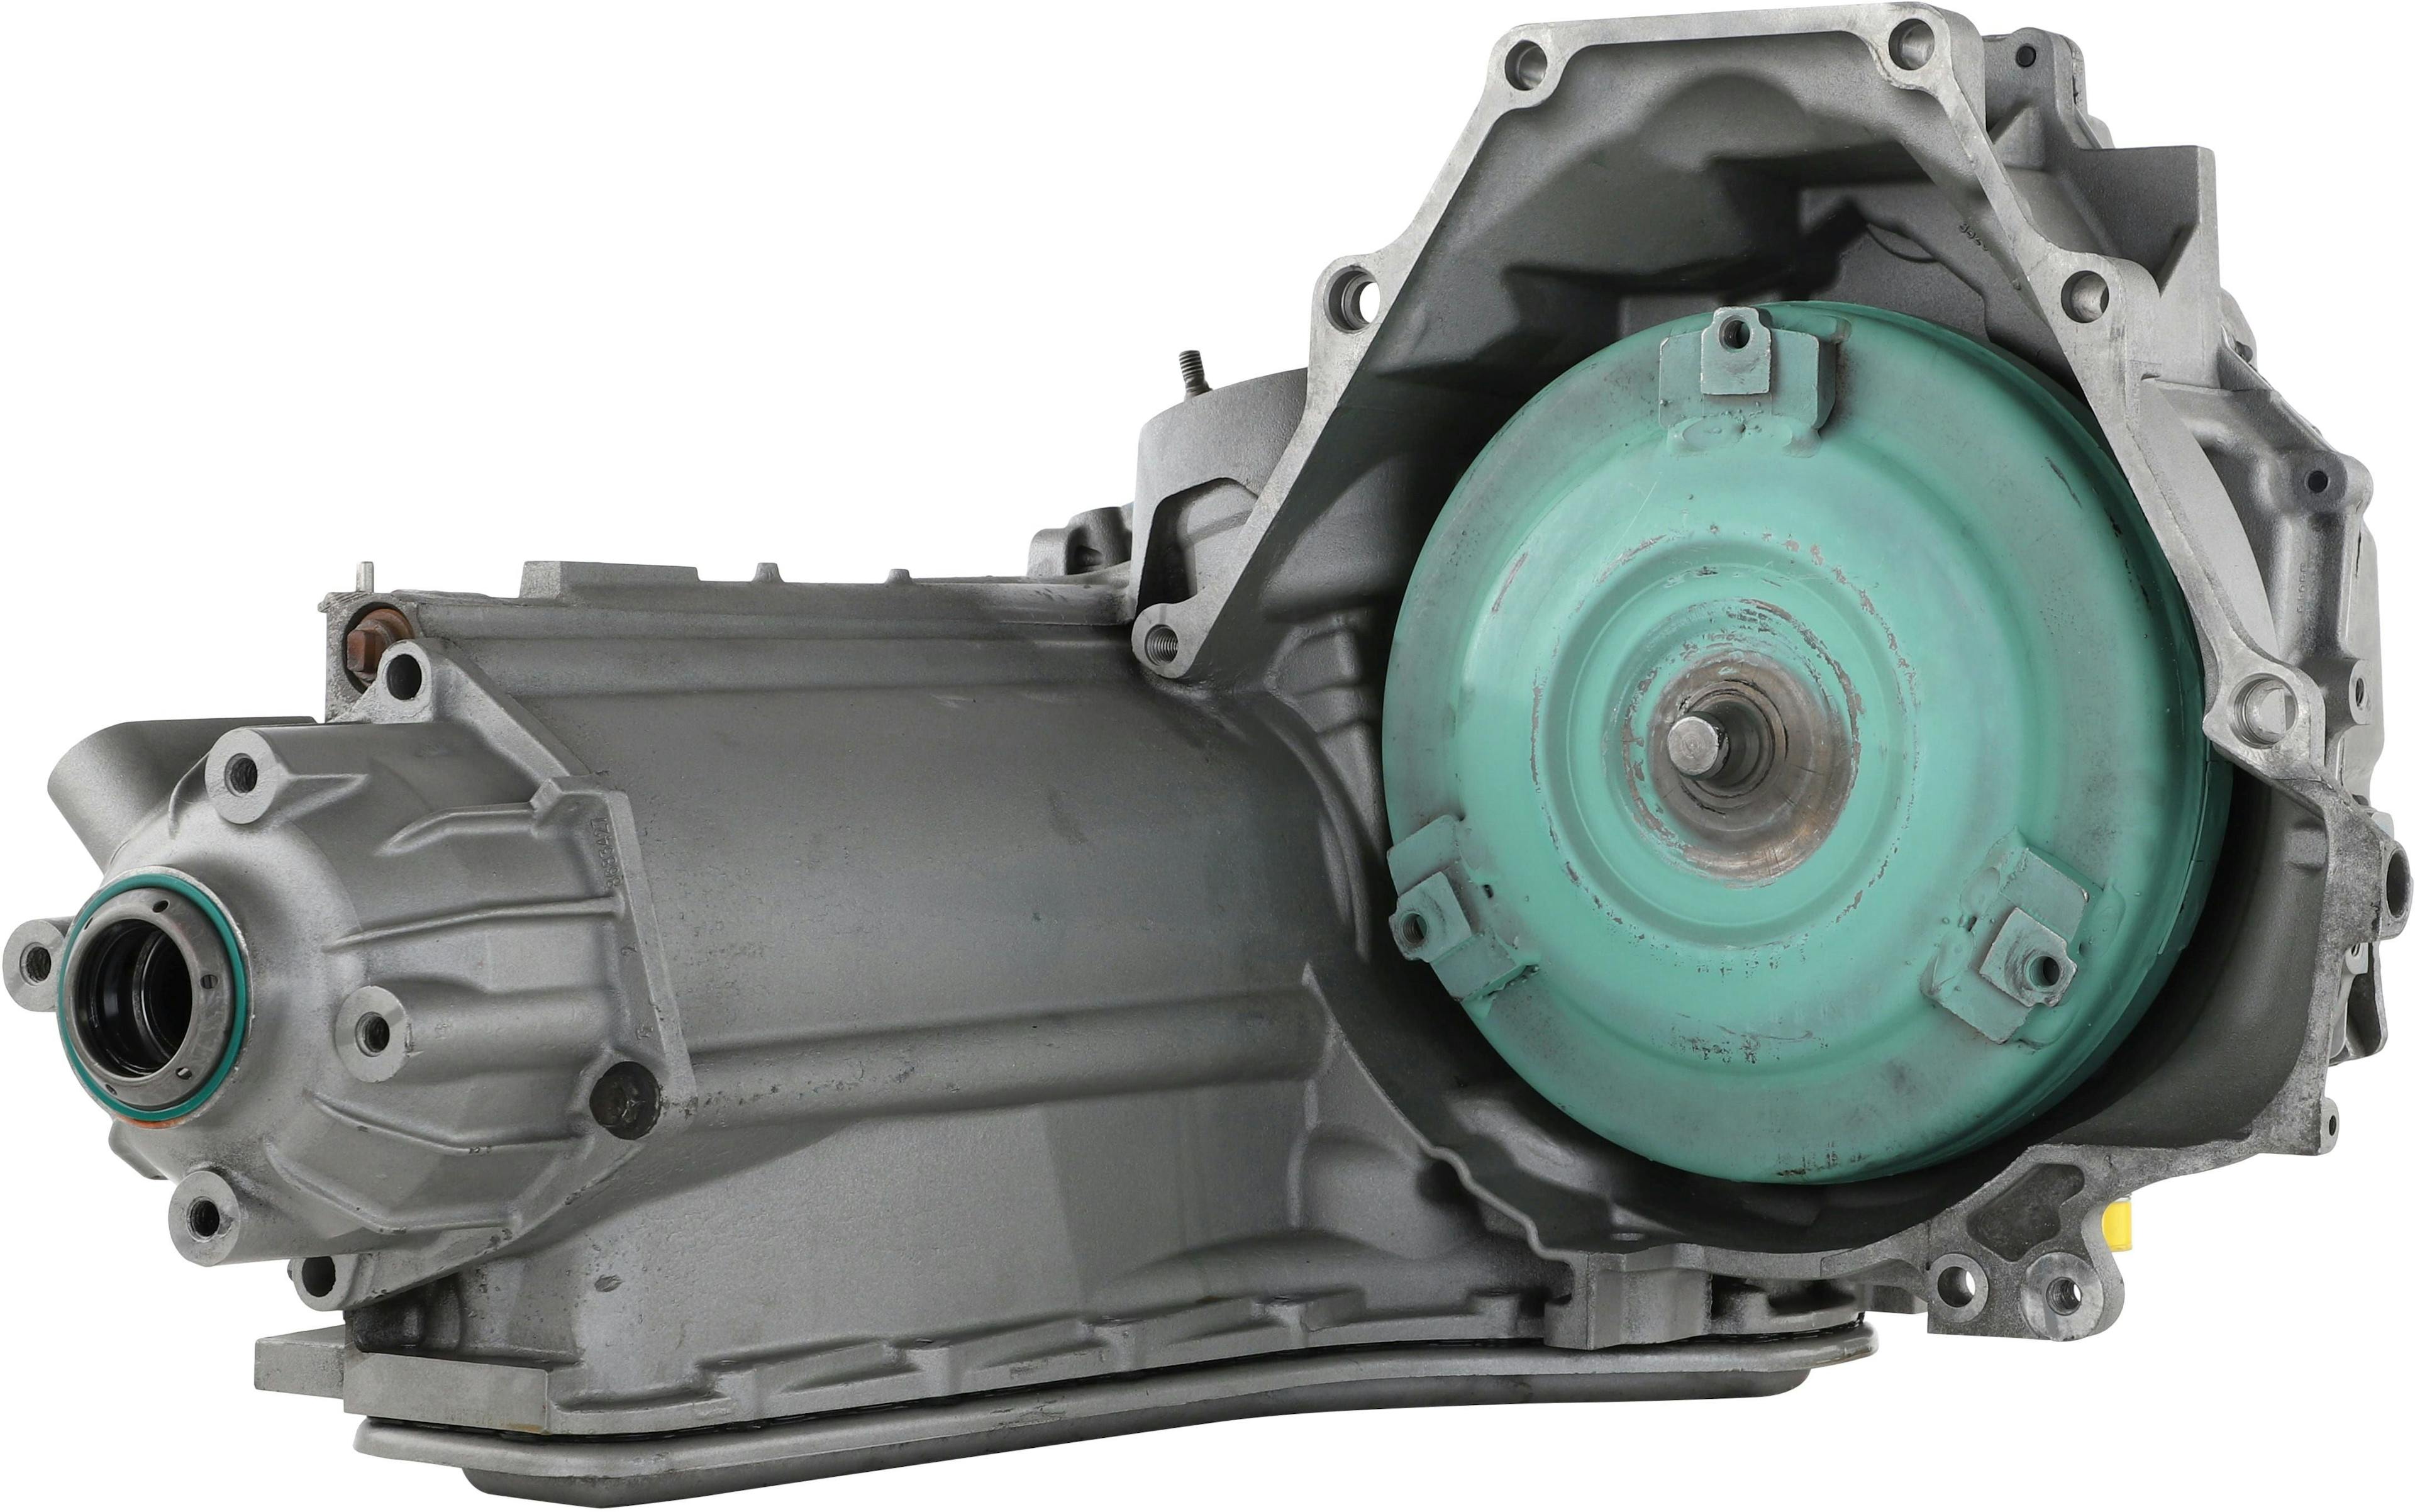 Automatic Transmission for 2006-2011 Chevrolet Impala/Monte Carlo FWD with 3.9L V6 Engine